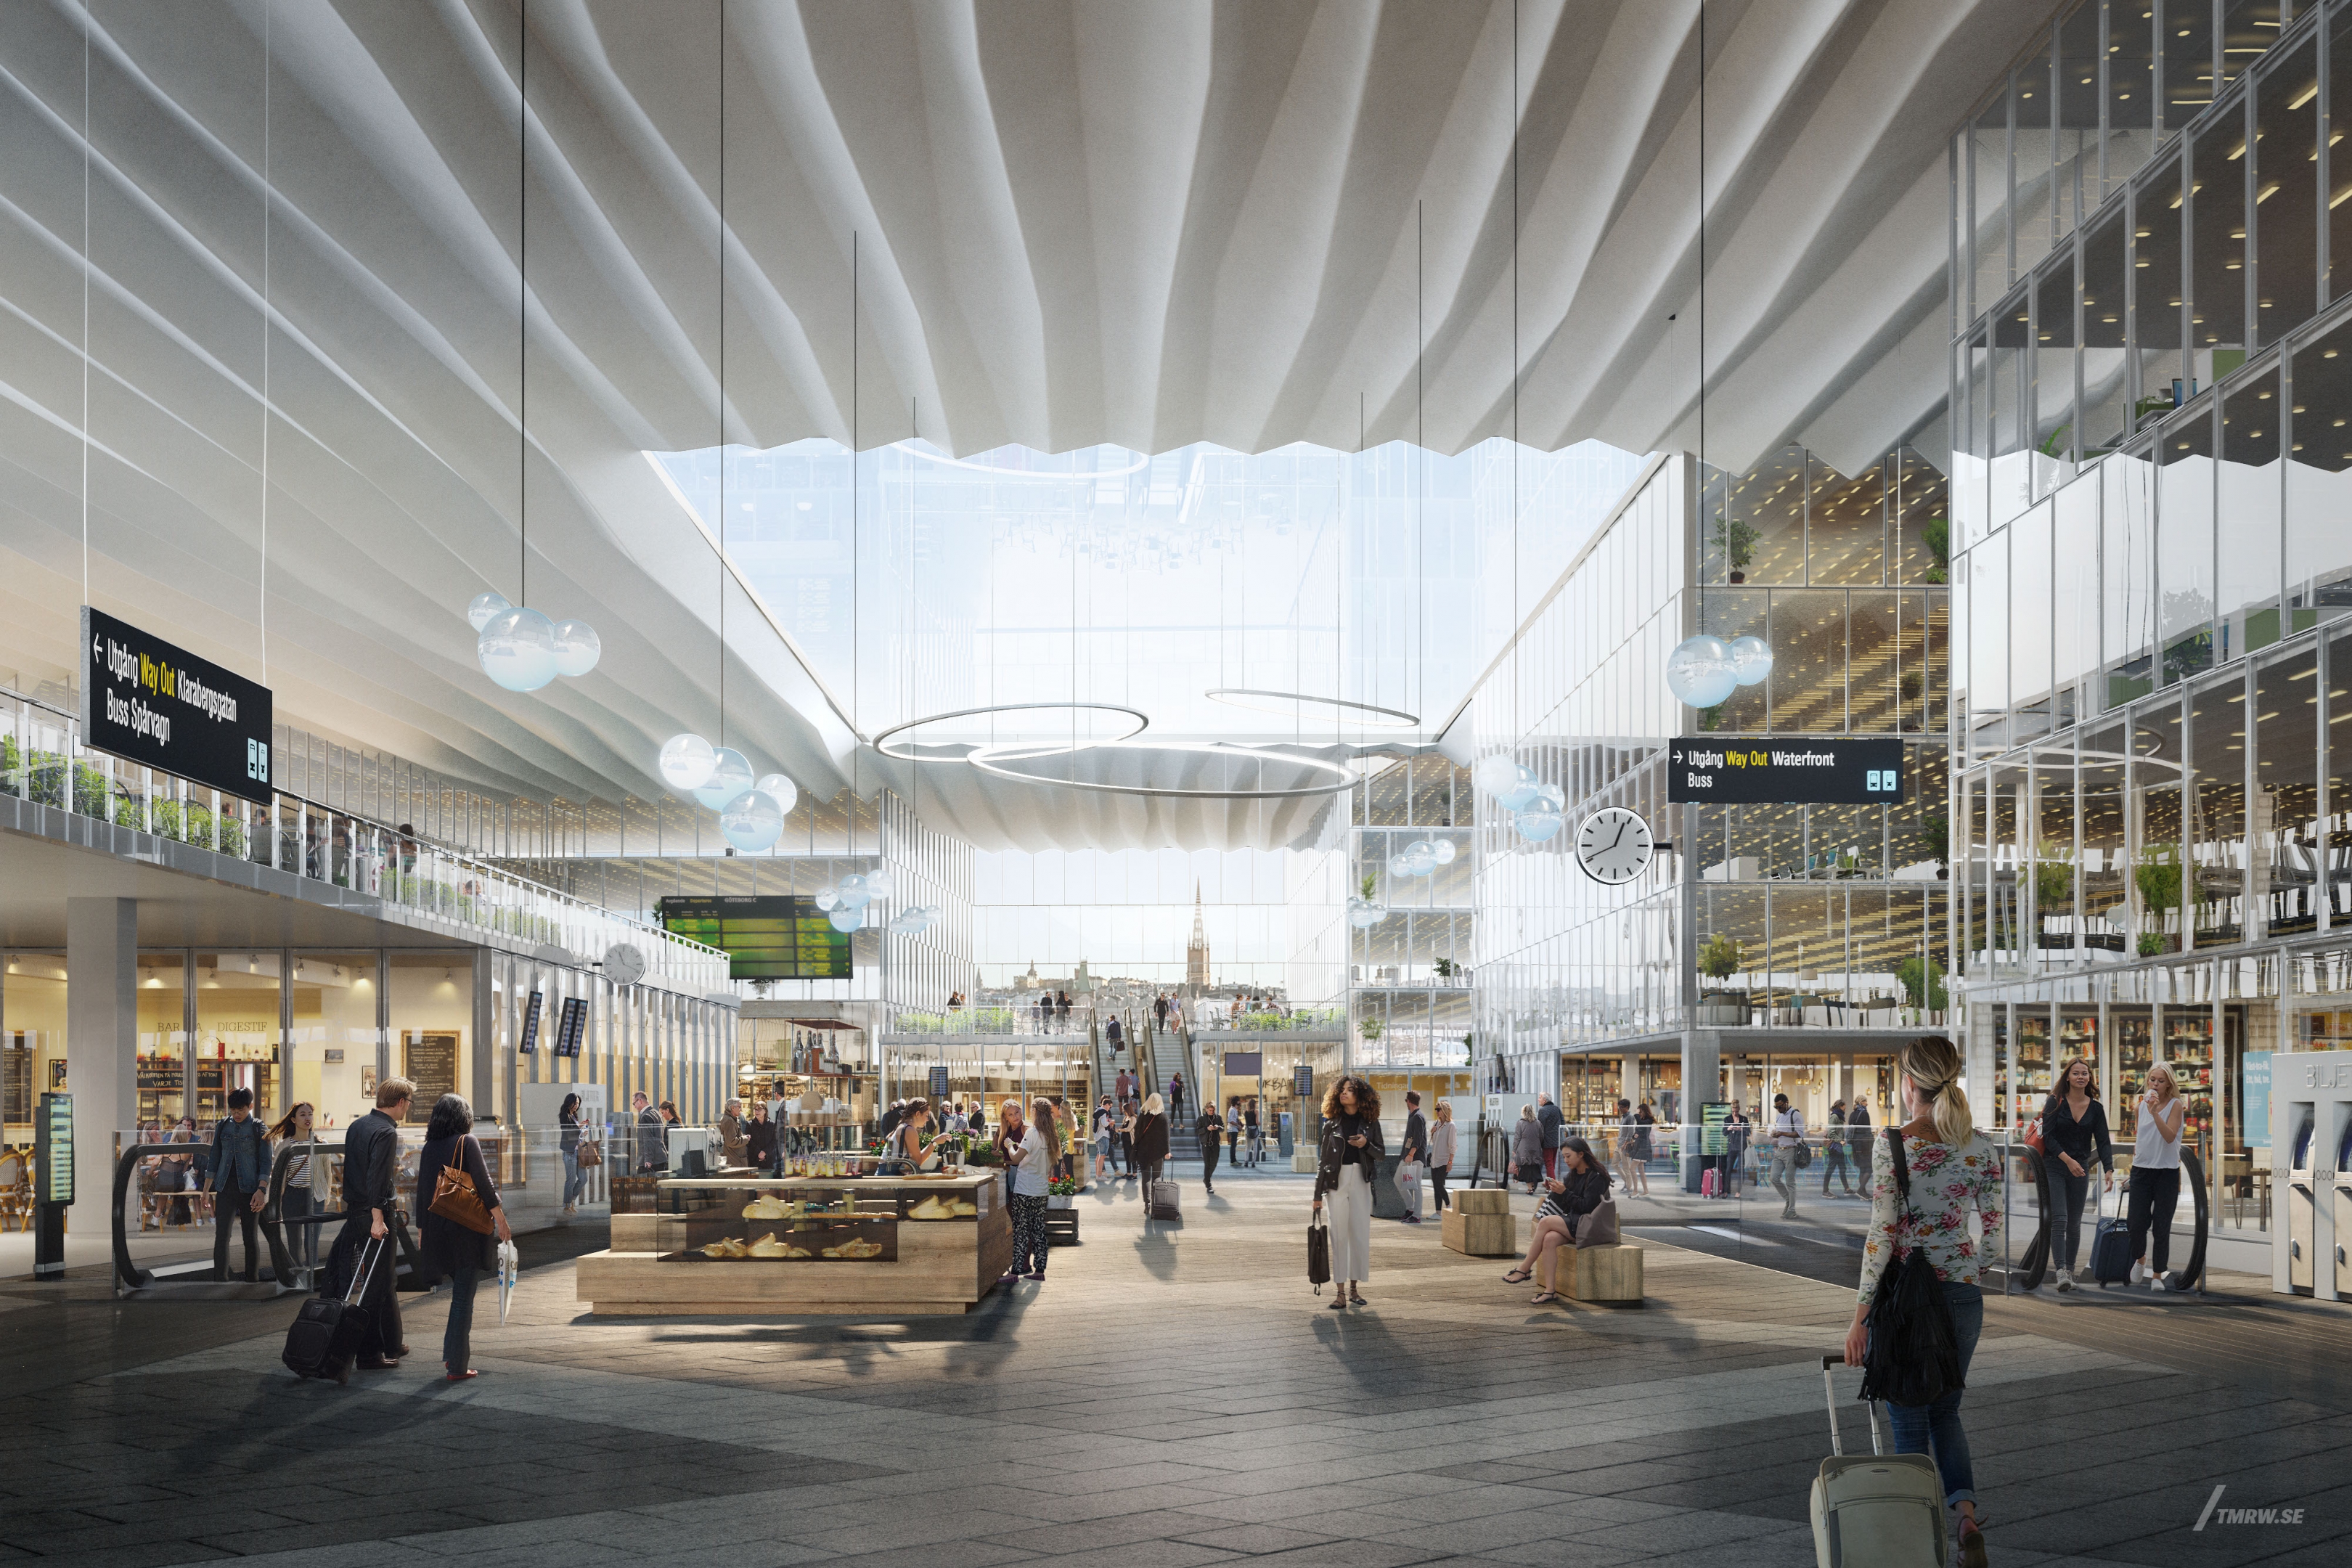 Architectural visualization of Sthlm Central for Jernhusen. An image of the interior of a central station at day with people walking around in daylight from street view.